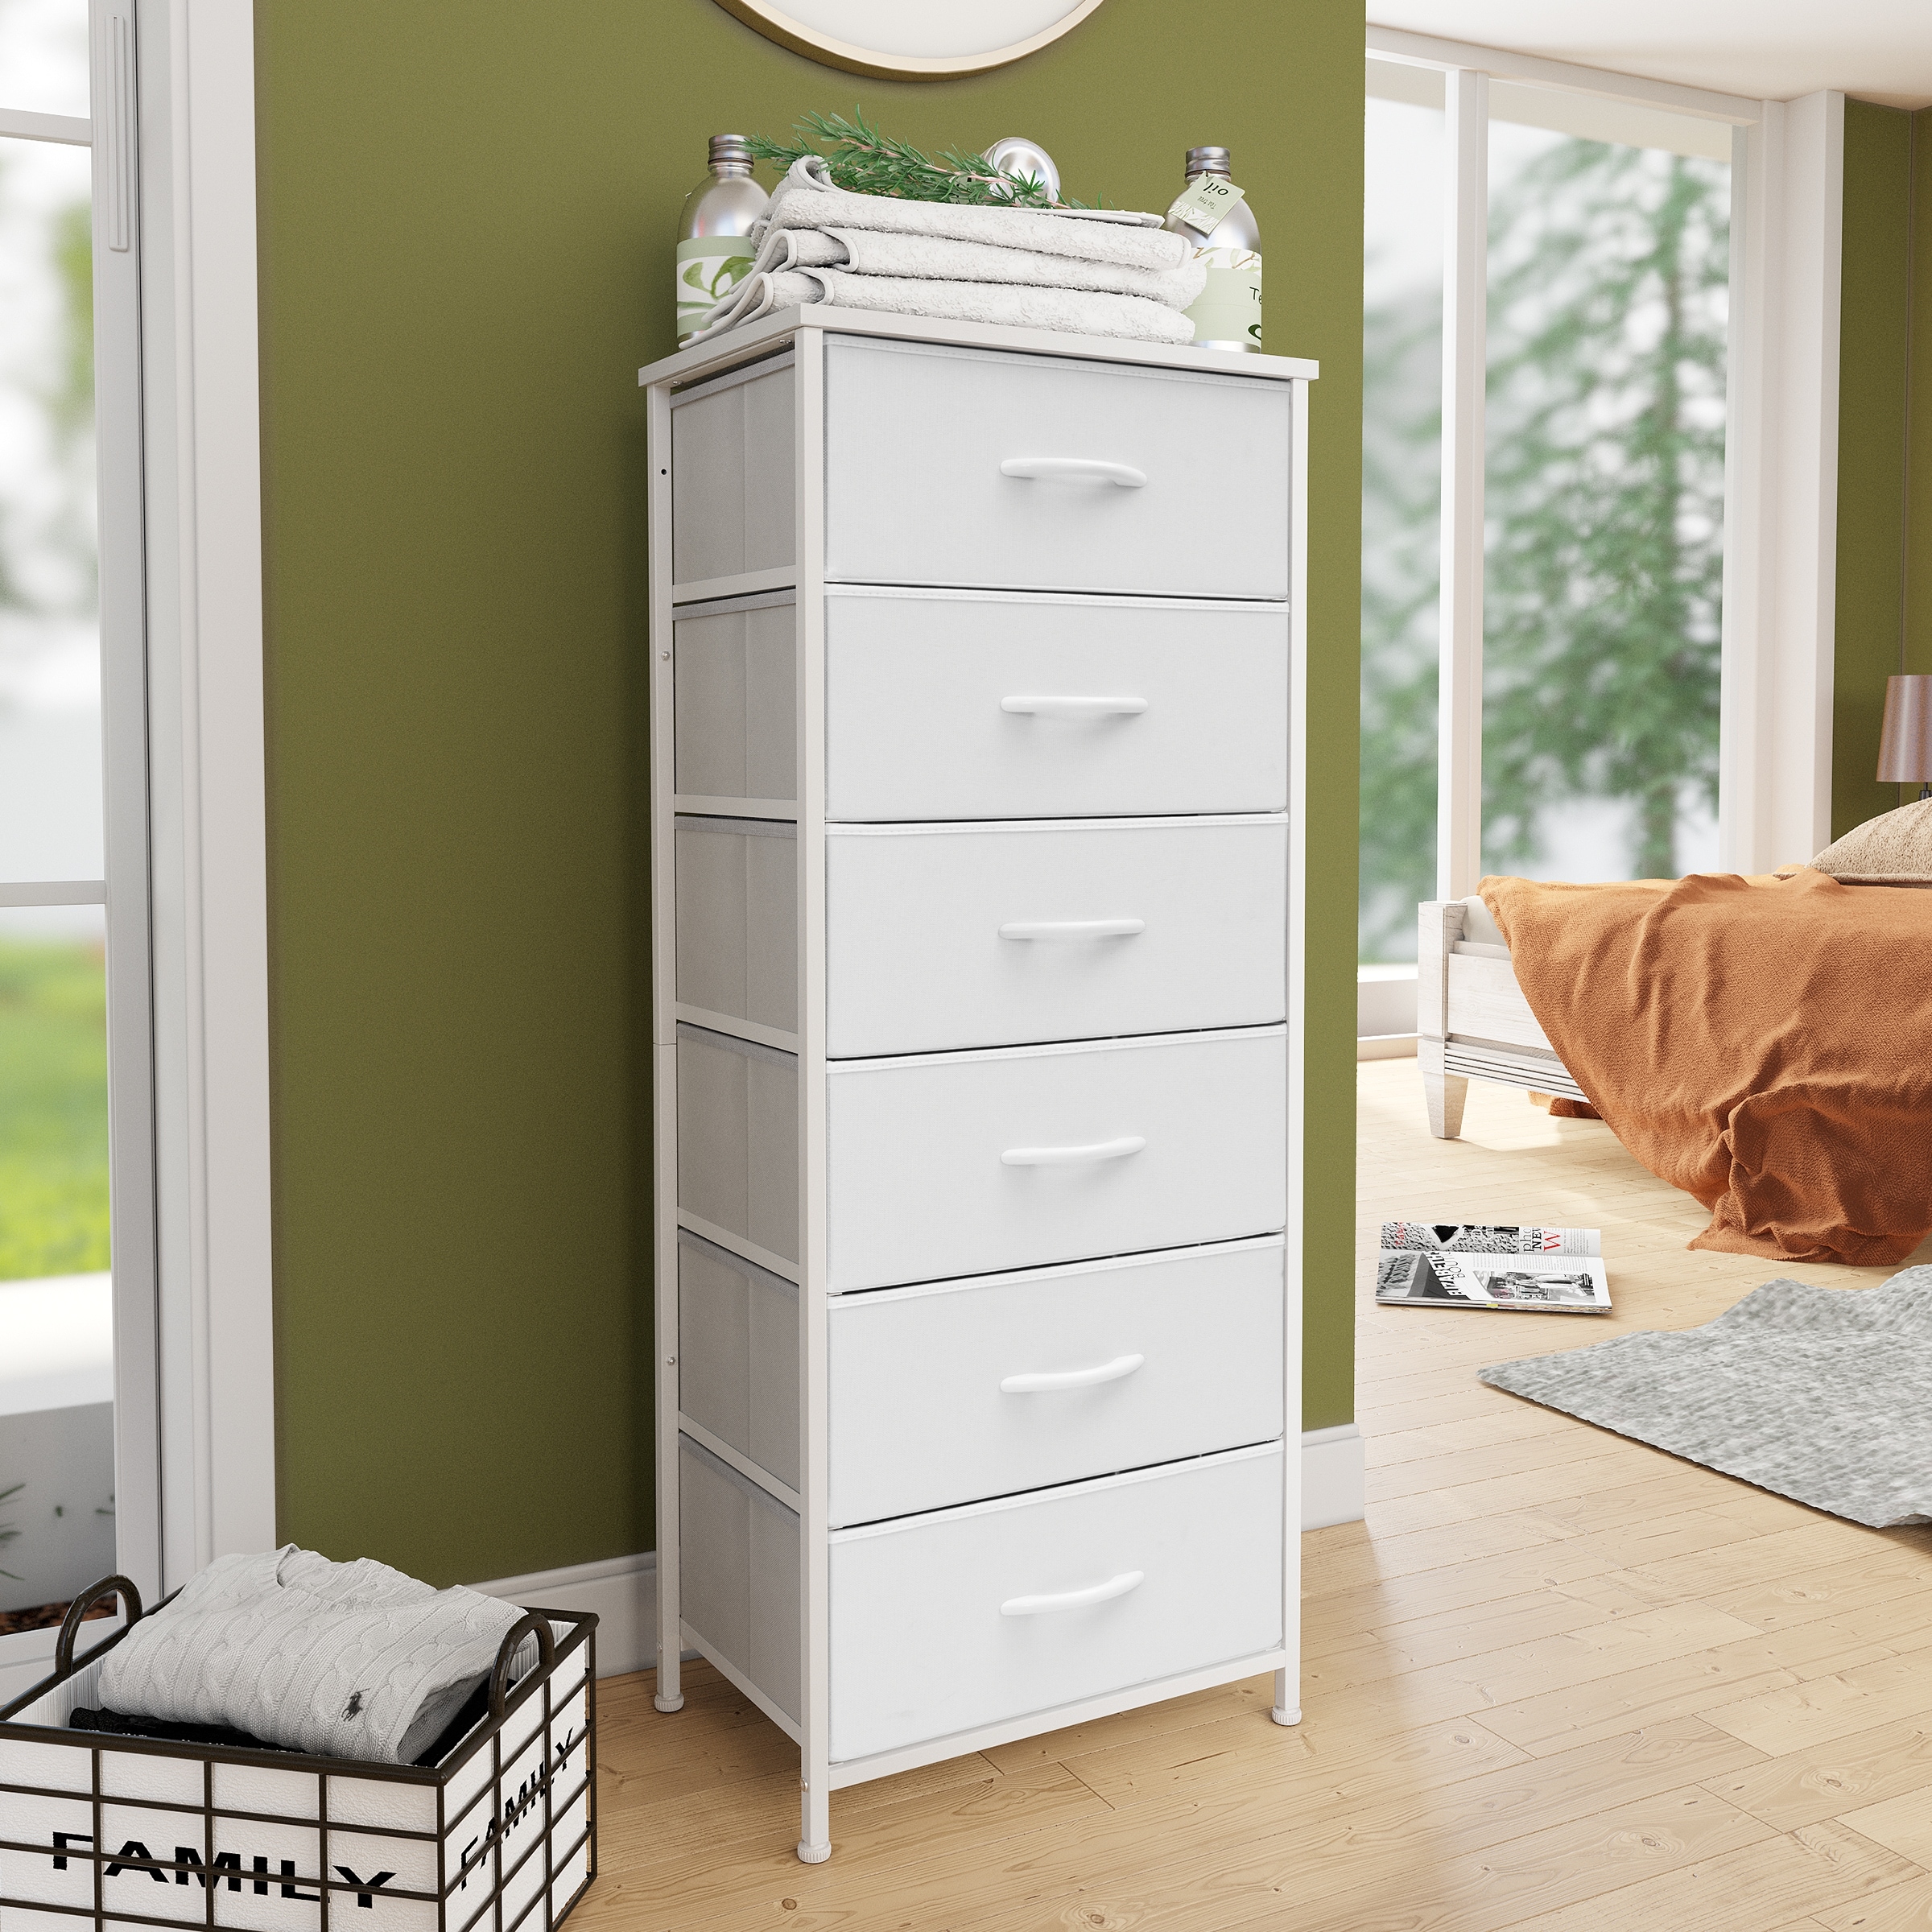 https://ak1.ostkcdn.com/images/products/is/images/direct/edf5d7669c6d45d4d7a4c466db9f2e5a4d8d78fa/Pellebant-6-Drawers-Vertical-Storage-Tower.jpg